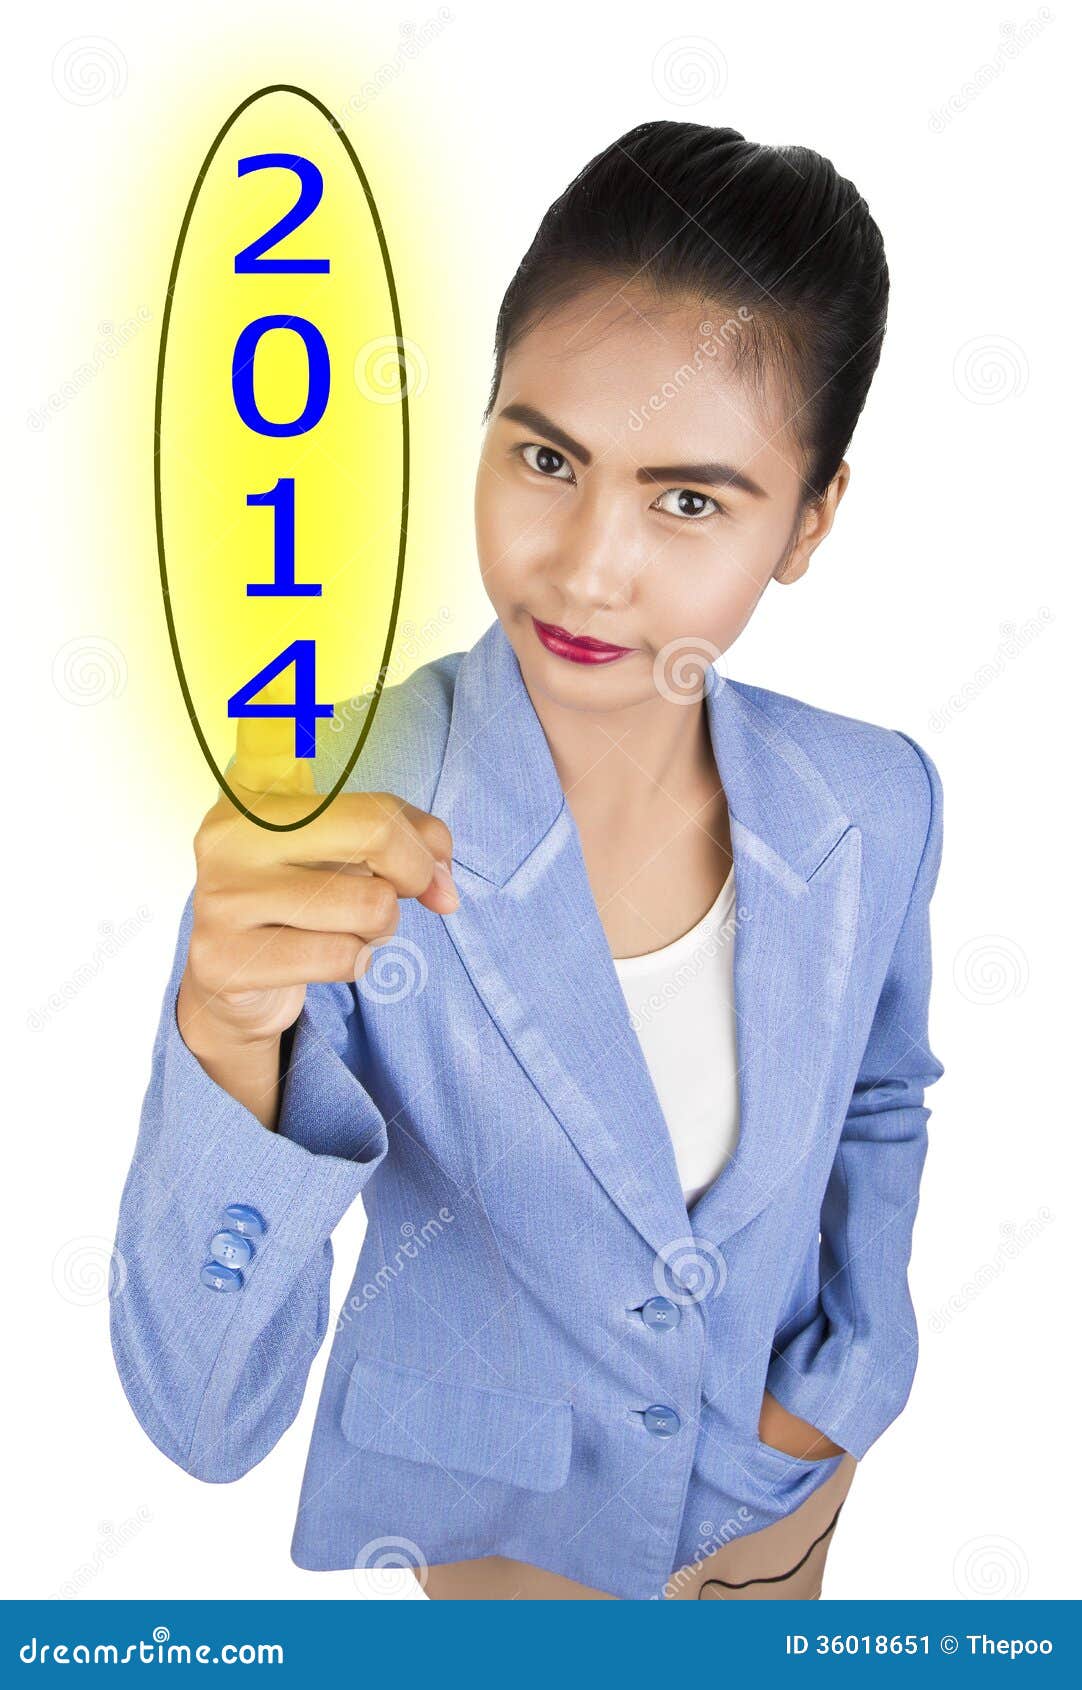 Screen Button with 2014 Number on Hand. Stock Image - Image of button ...